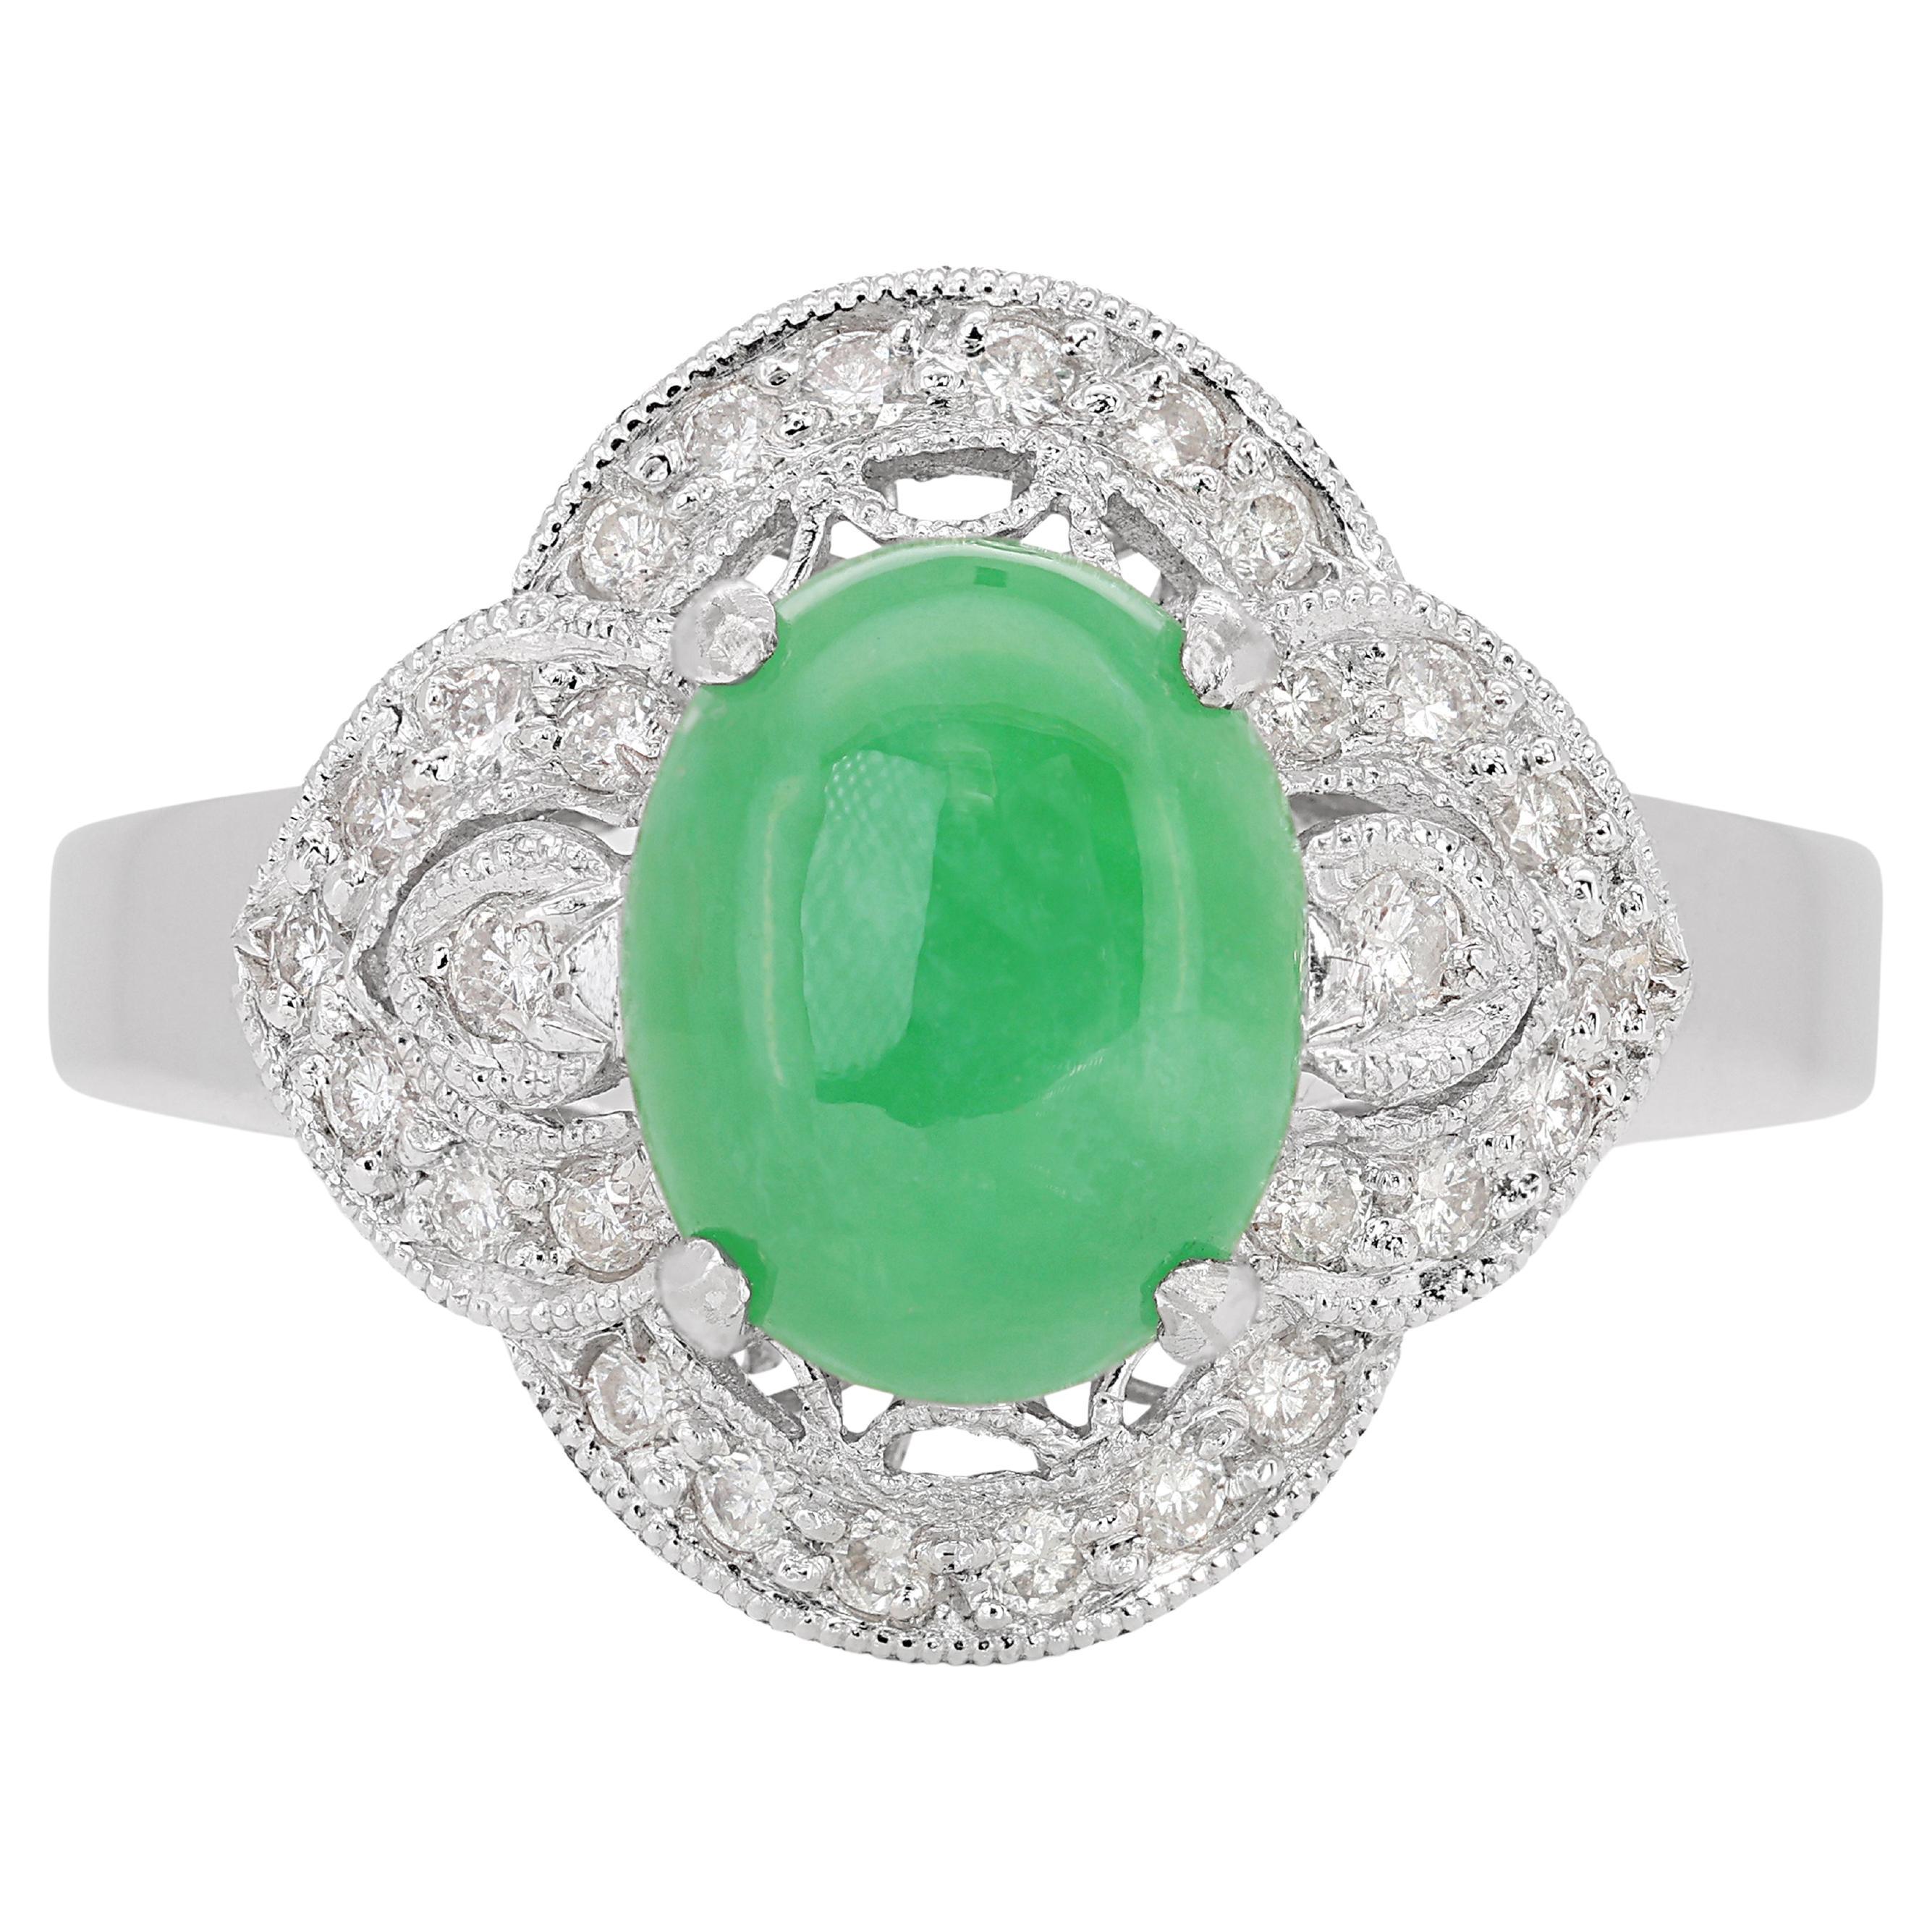 Bright Jade and Diamond Ring set in Gleaming 18K White Gold